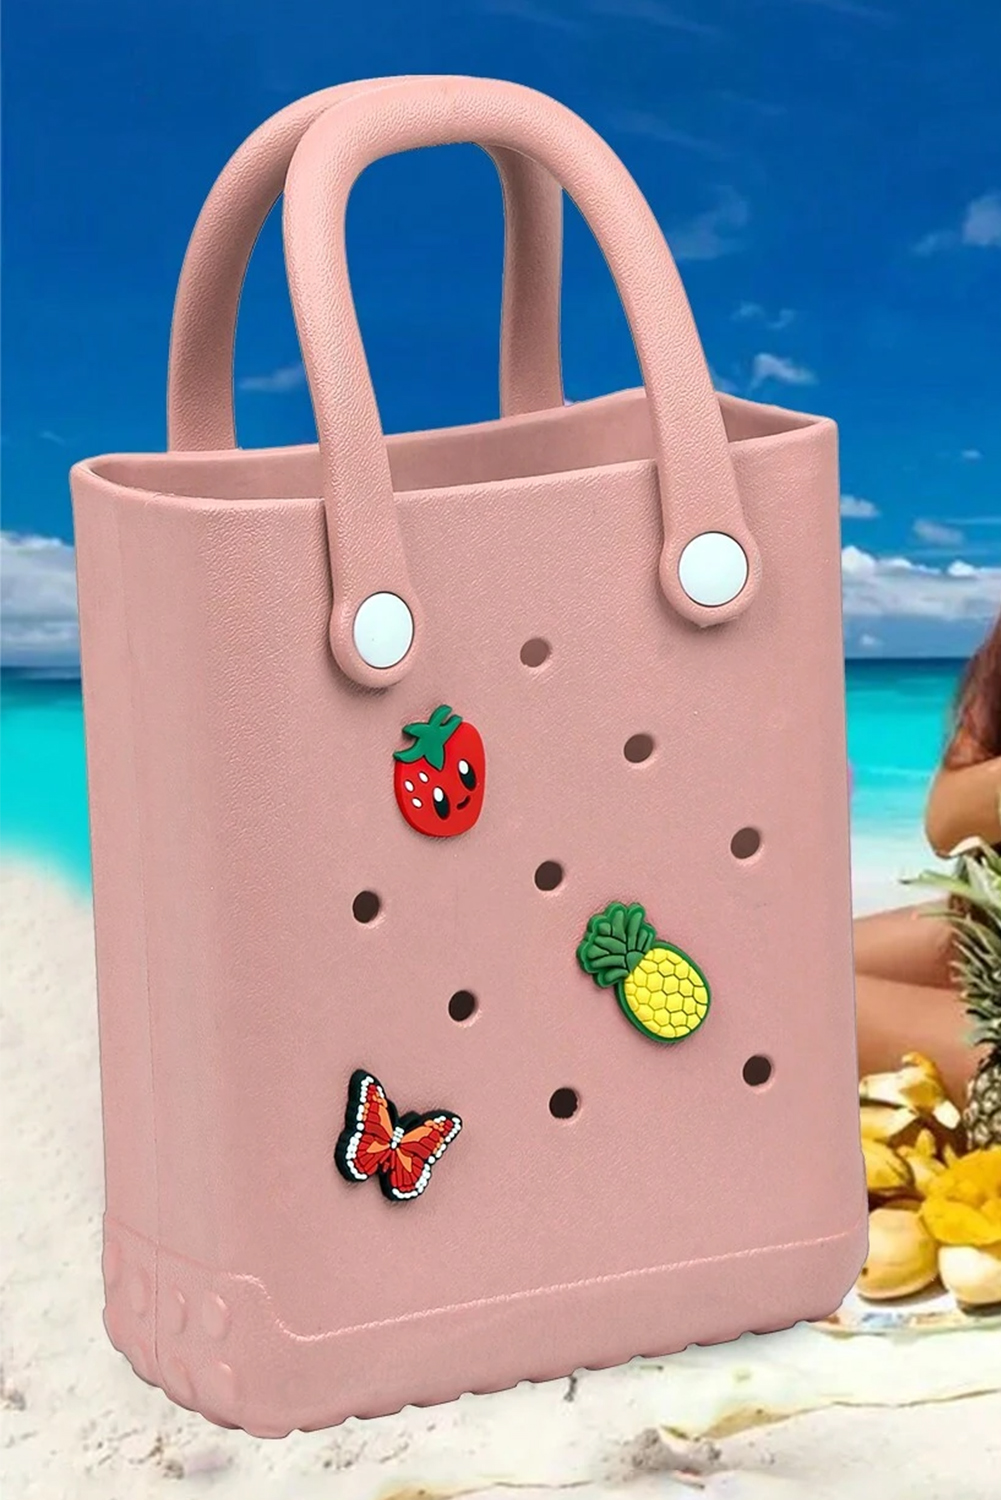 Shewin Wholesale Lady Apricot Pink Cute Jelly Eva Cut Out TOTE BAG